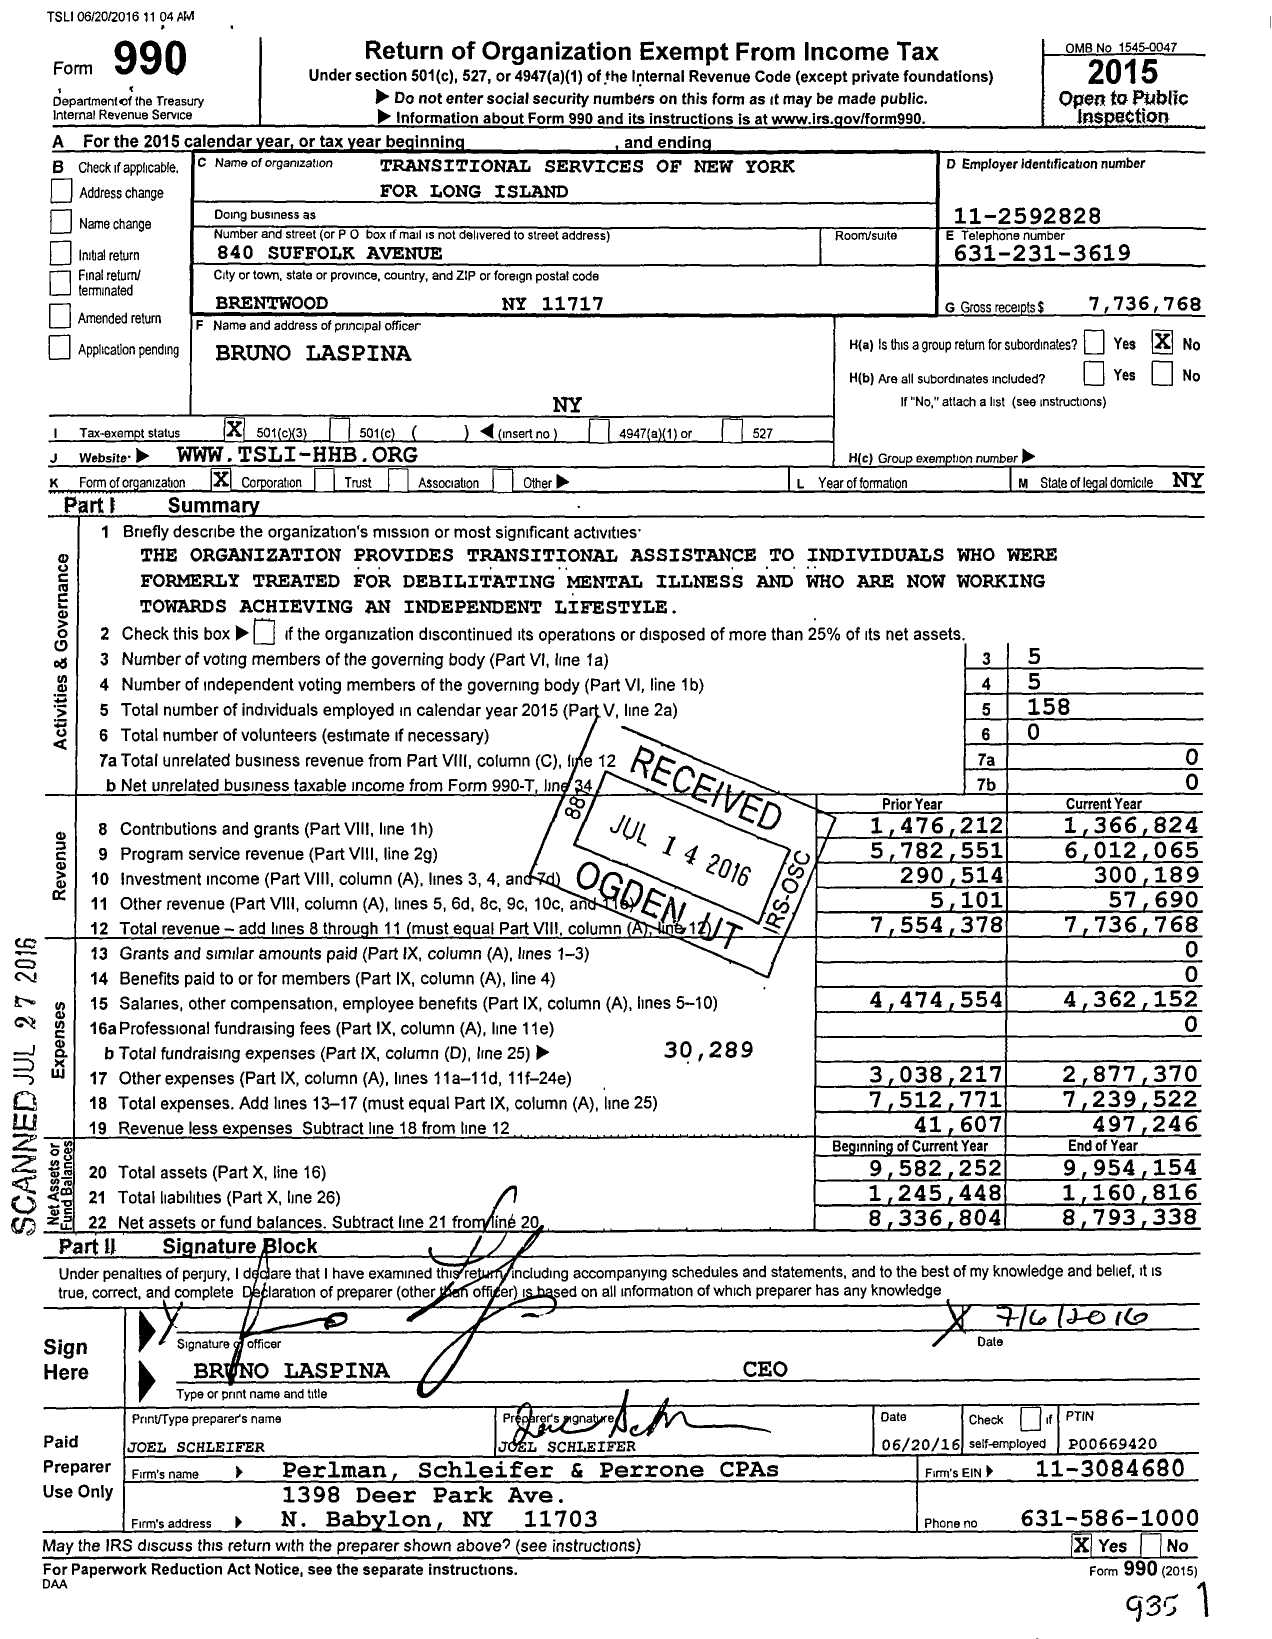 Image of first page of 2015 Form 990 for Transitional Services of New York for Long Island (TSLI)